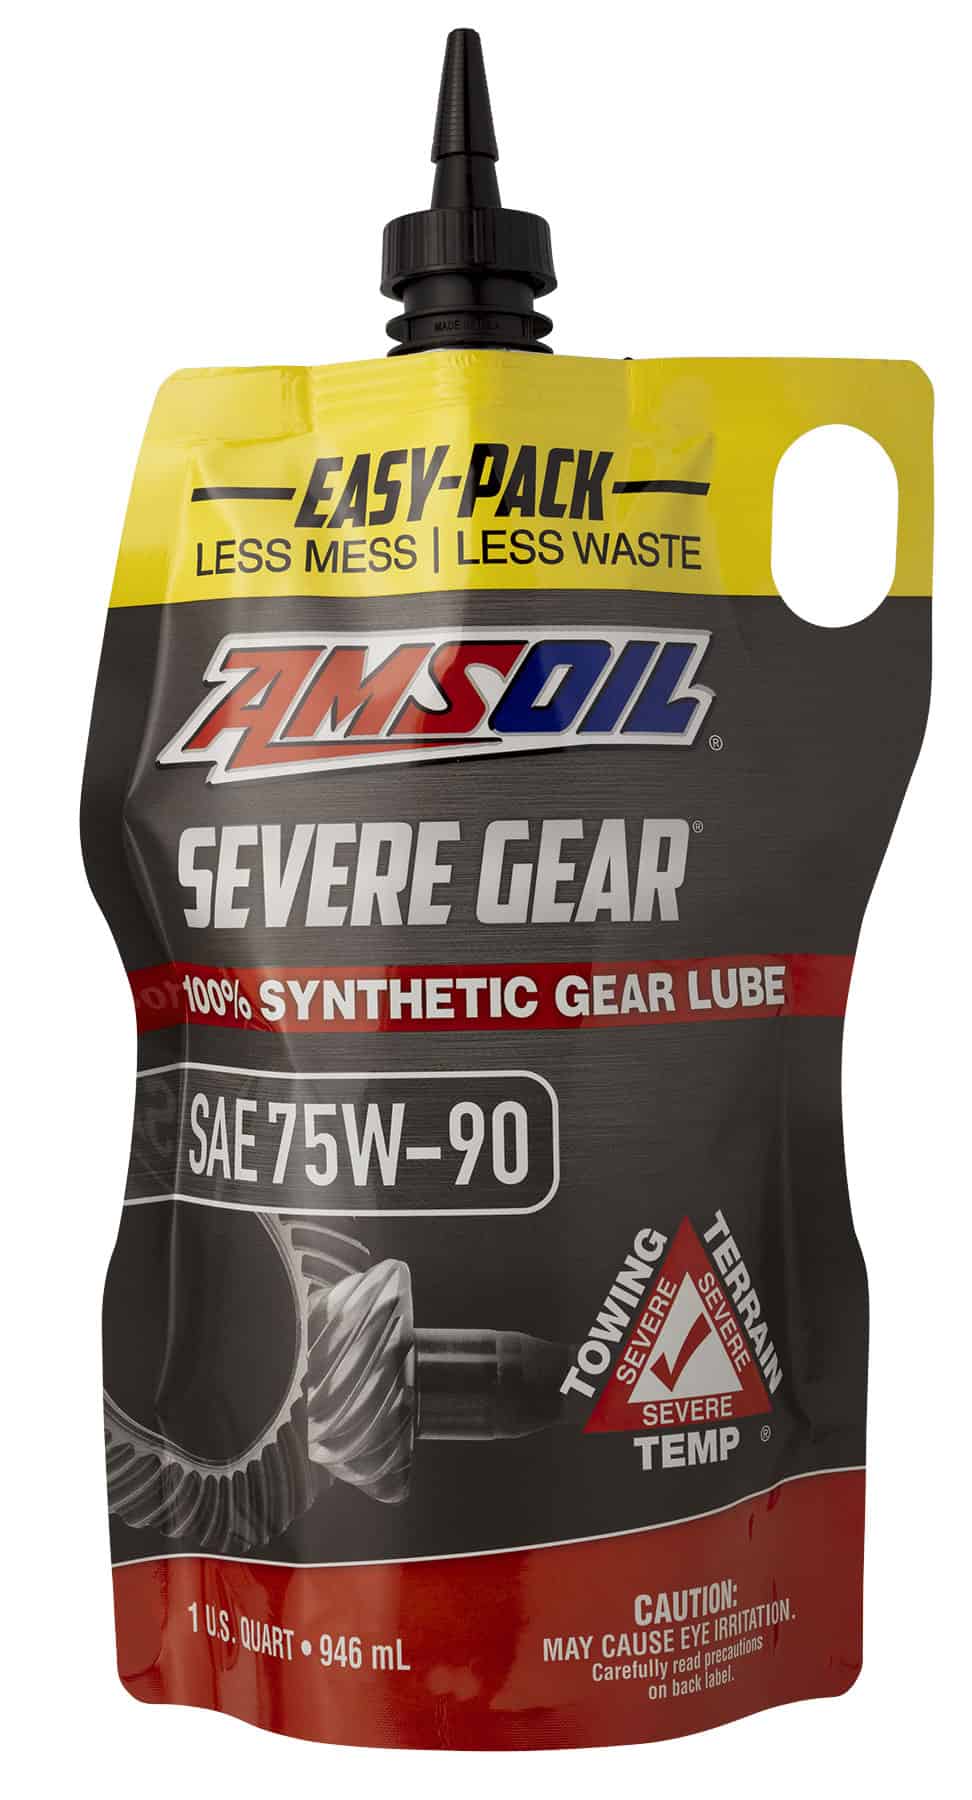 SEVERE GEAR® 100% Synthetic Extreme-Pressure Gear Lube